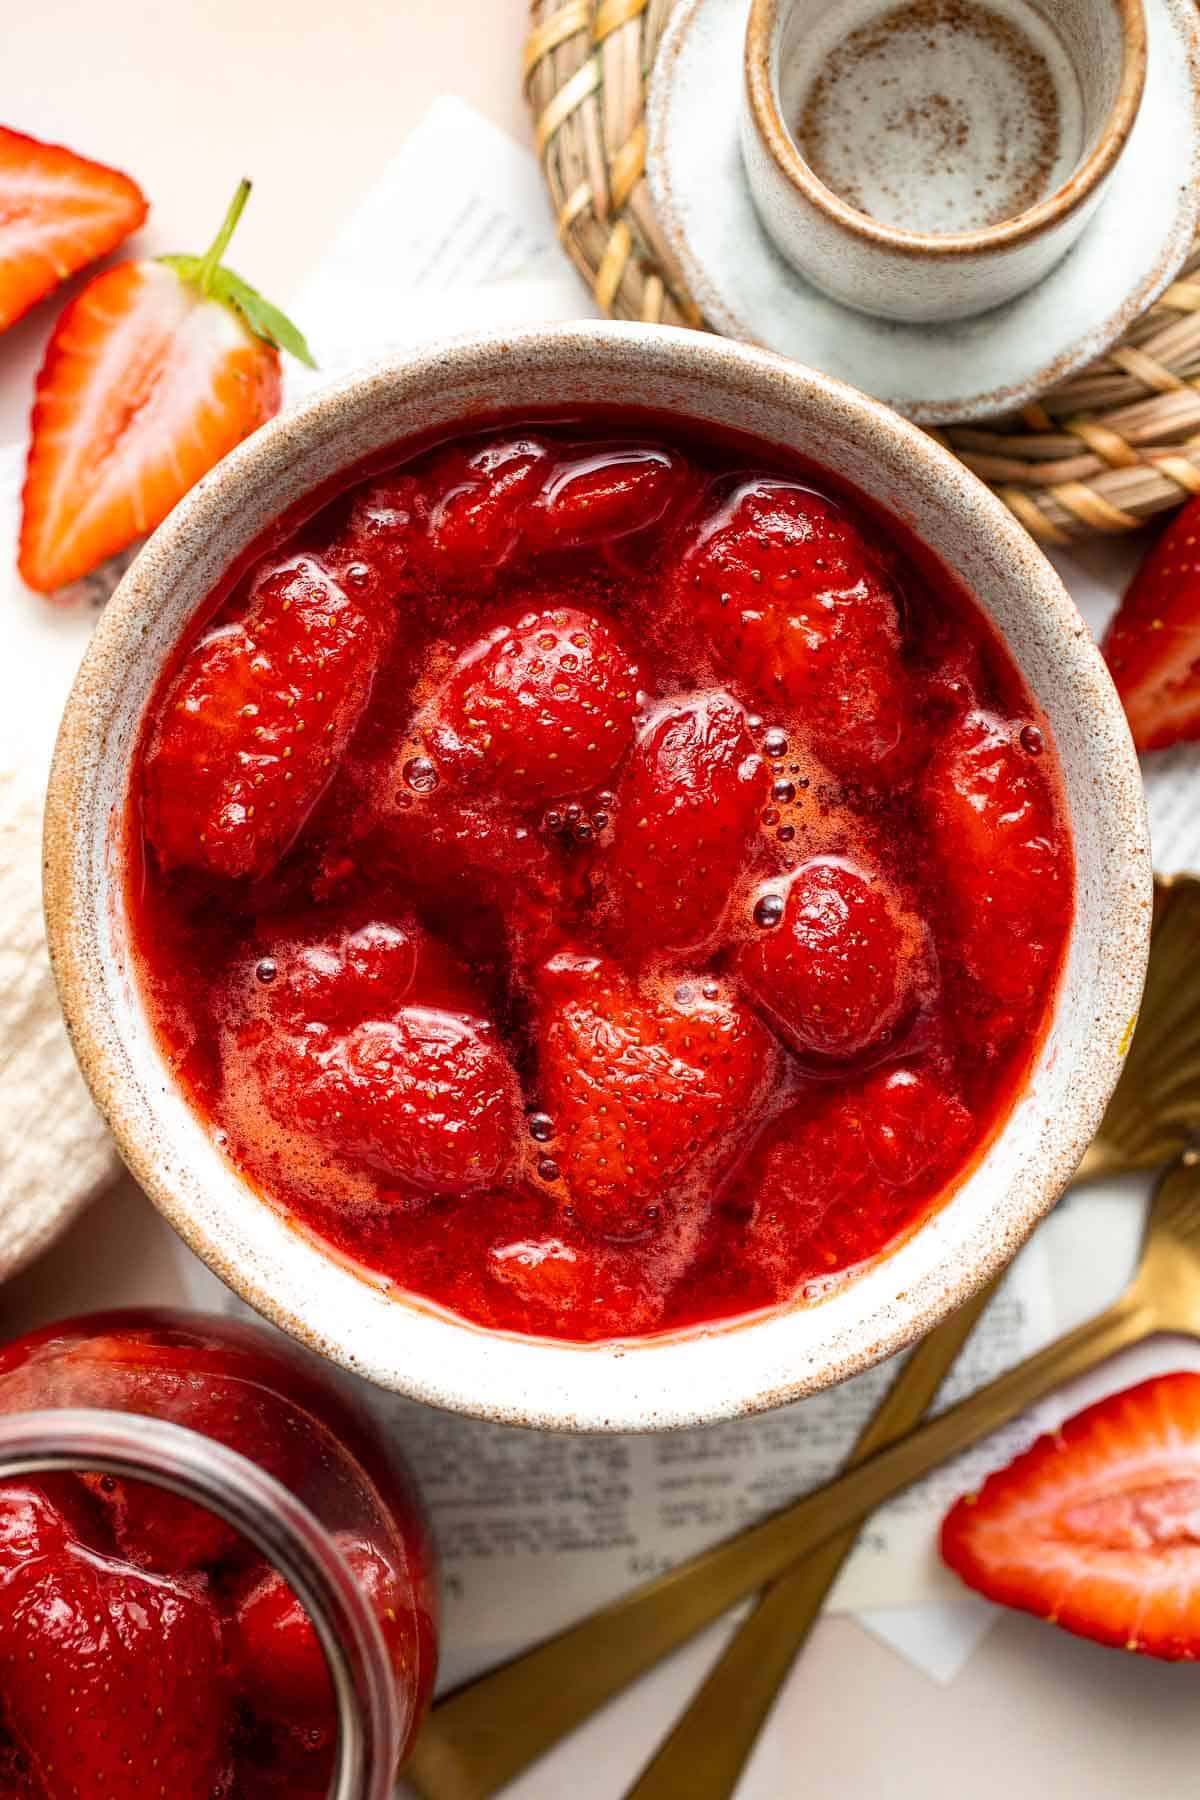 Strawberry Compote transforms strawberries into jammy, syrupy, sweet preserves that you can use in so many different ways. Make with 3 simple ingredients! | aheadofthyme.com